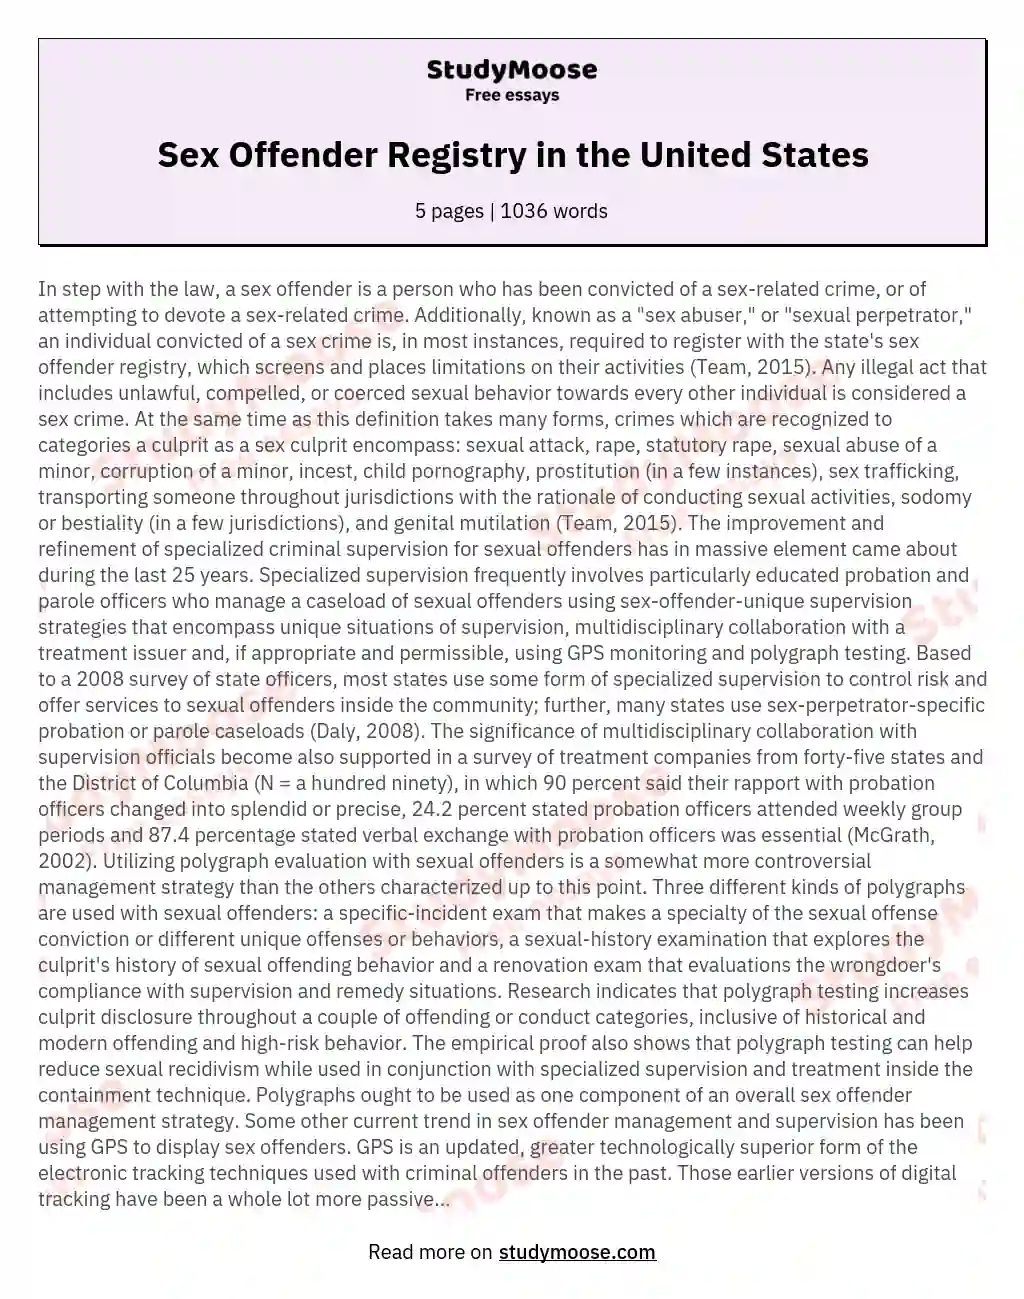 Sex Offender Registry in the United States essay